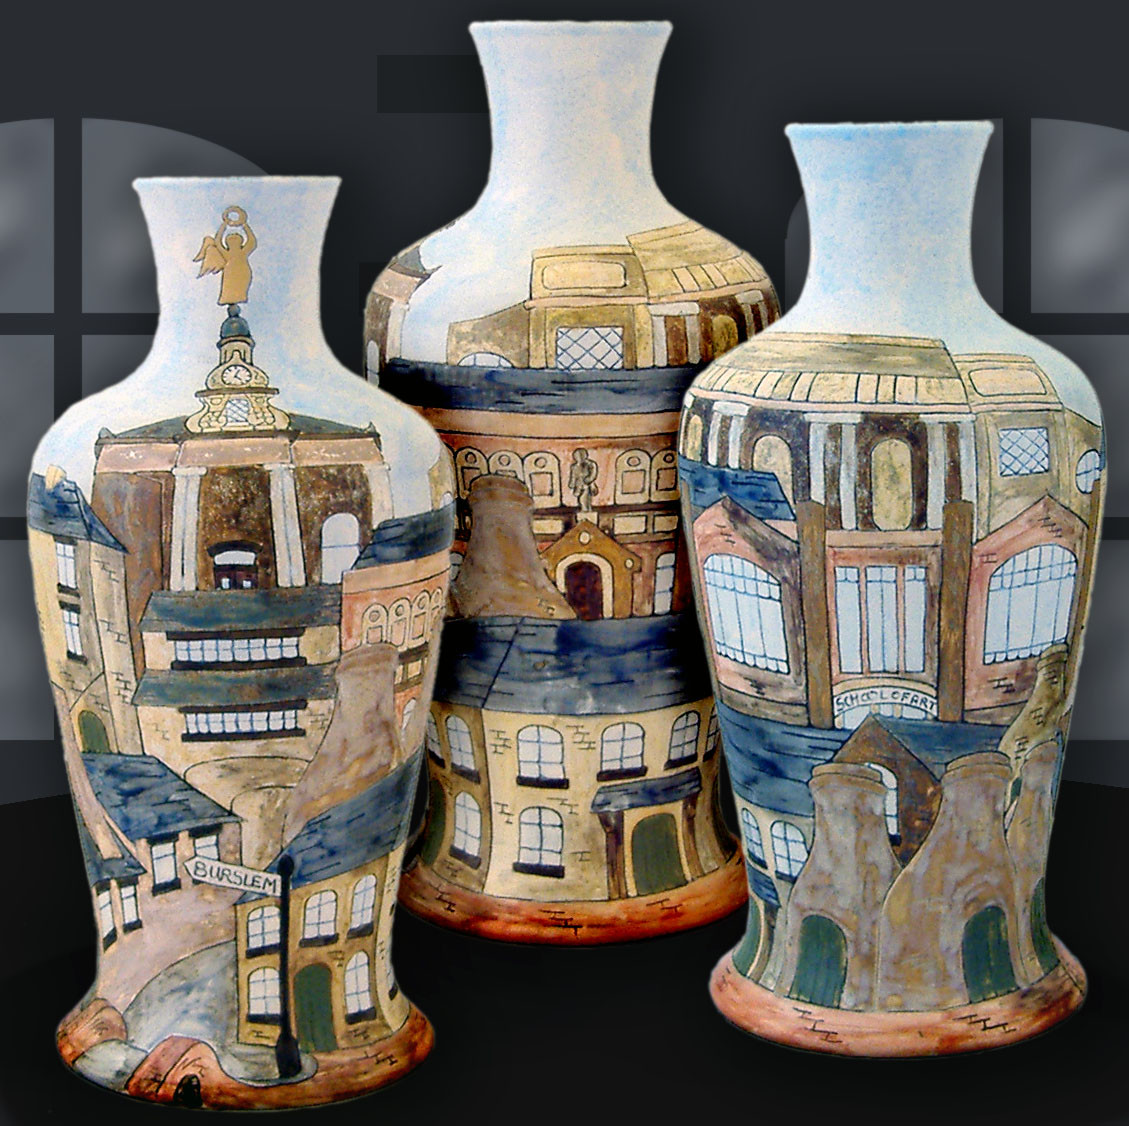 19 Amazing Old Chinese Vase Markings 2024 free download old chinese vase markings of burslem pottery designed vase shop stoke on trent inside six towns make up the city of stoke on trent the potteriesthis is the 30cm vase showing the well know la